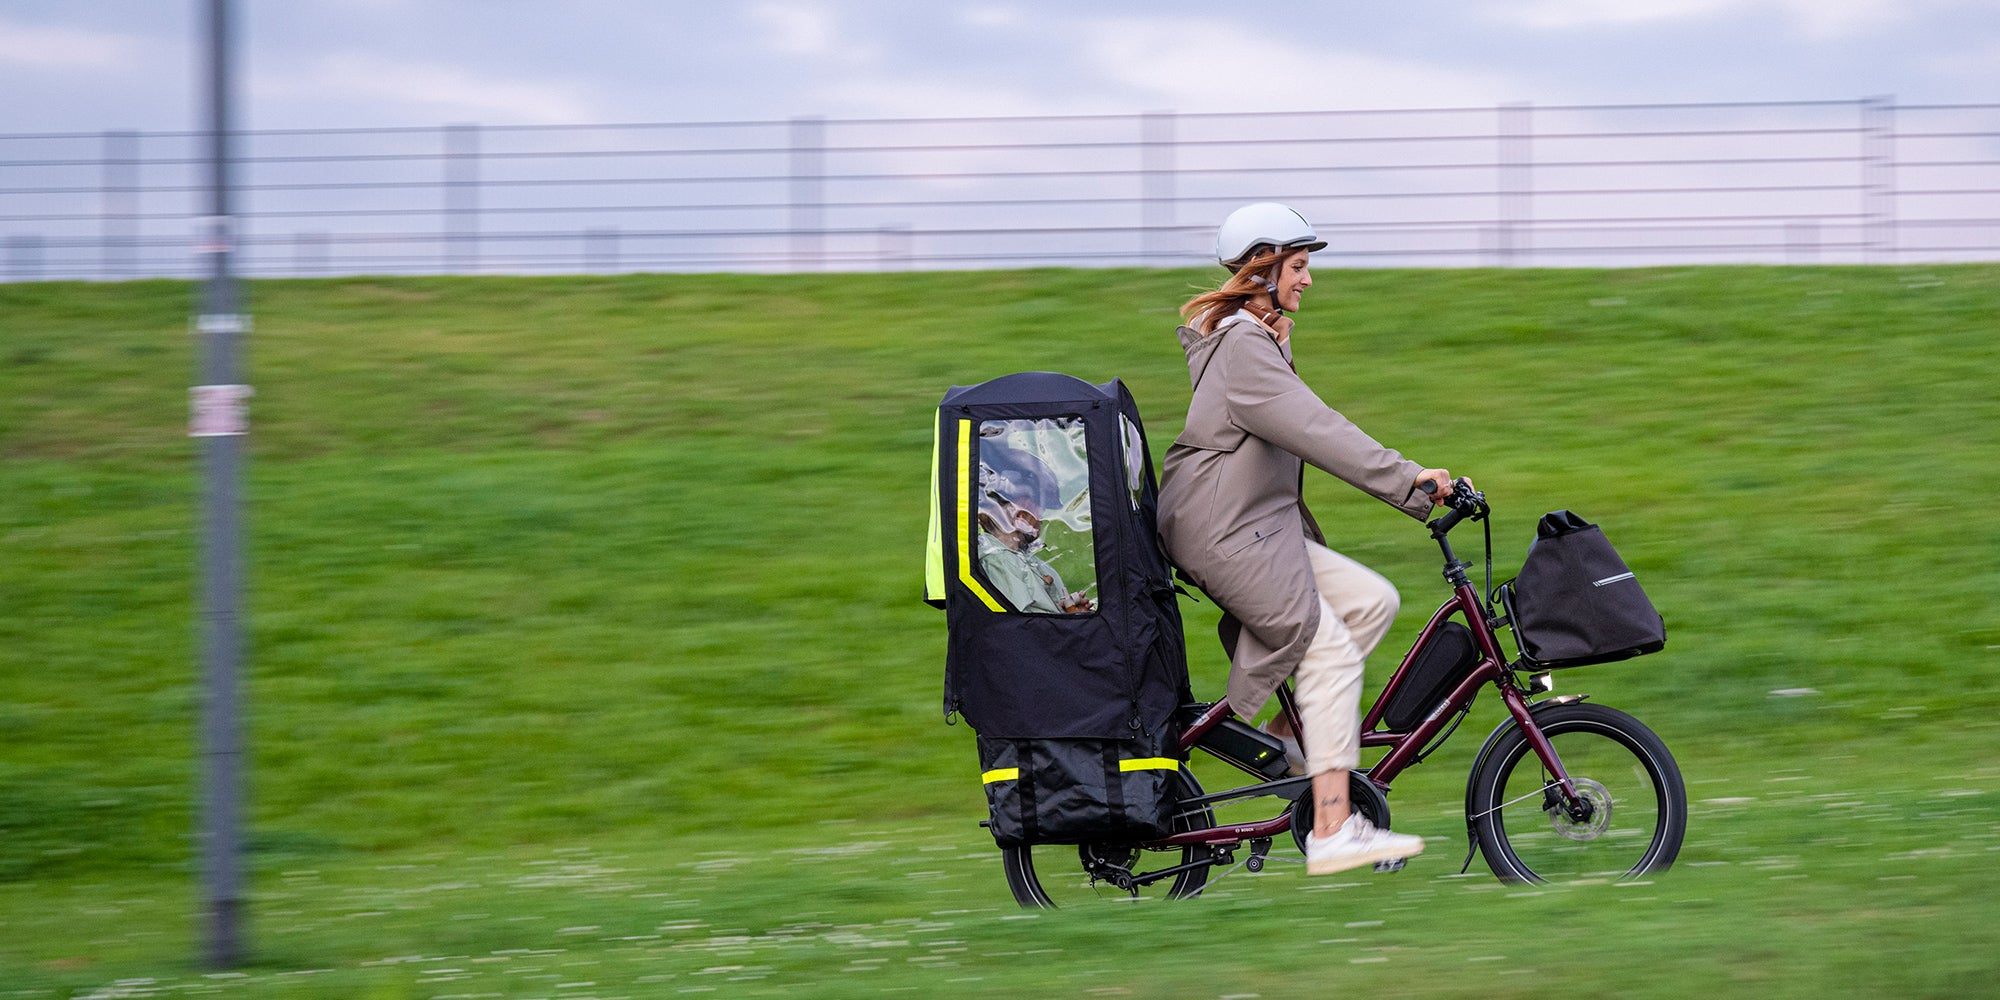 Woman riding Tern Quick Haul e-bike with child on the back in covered accessory